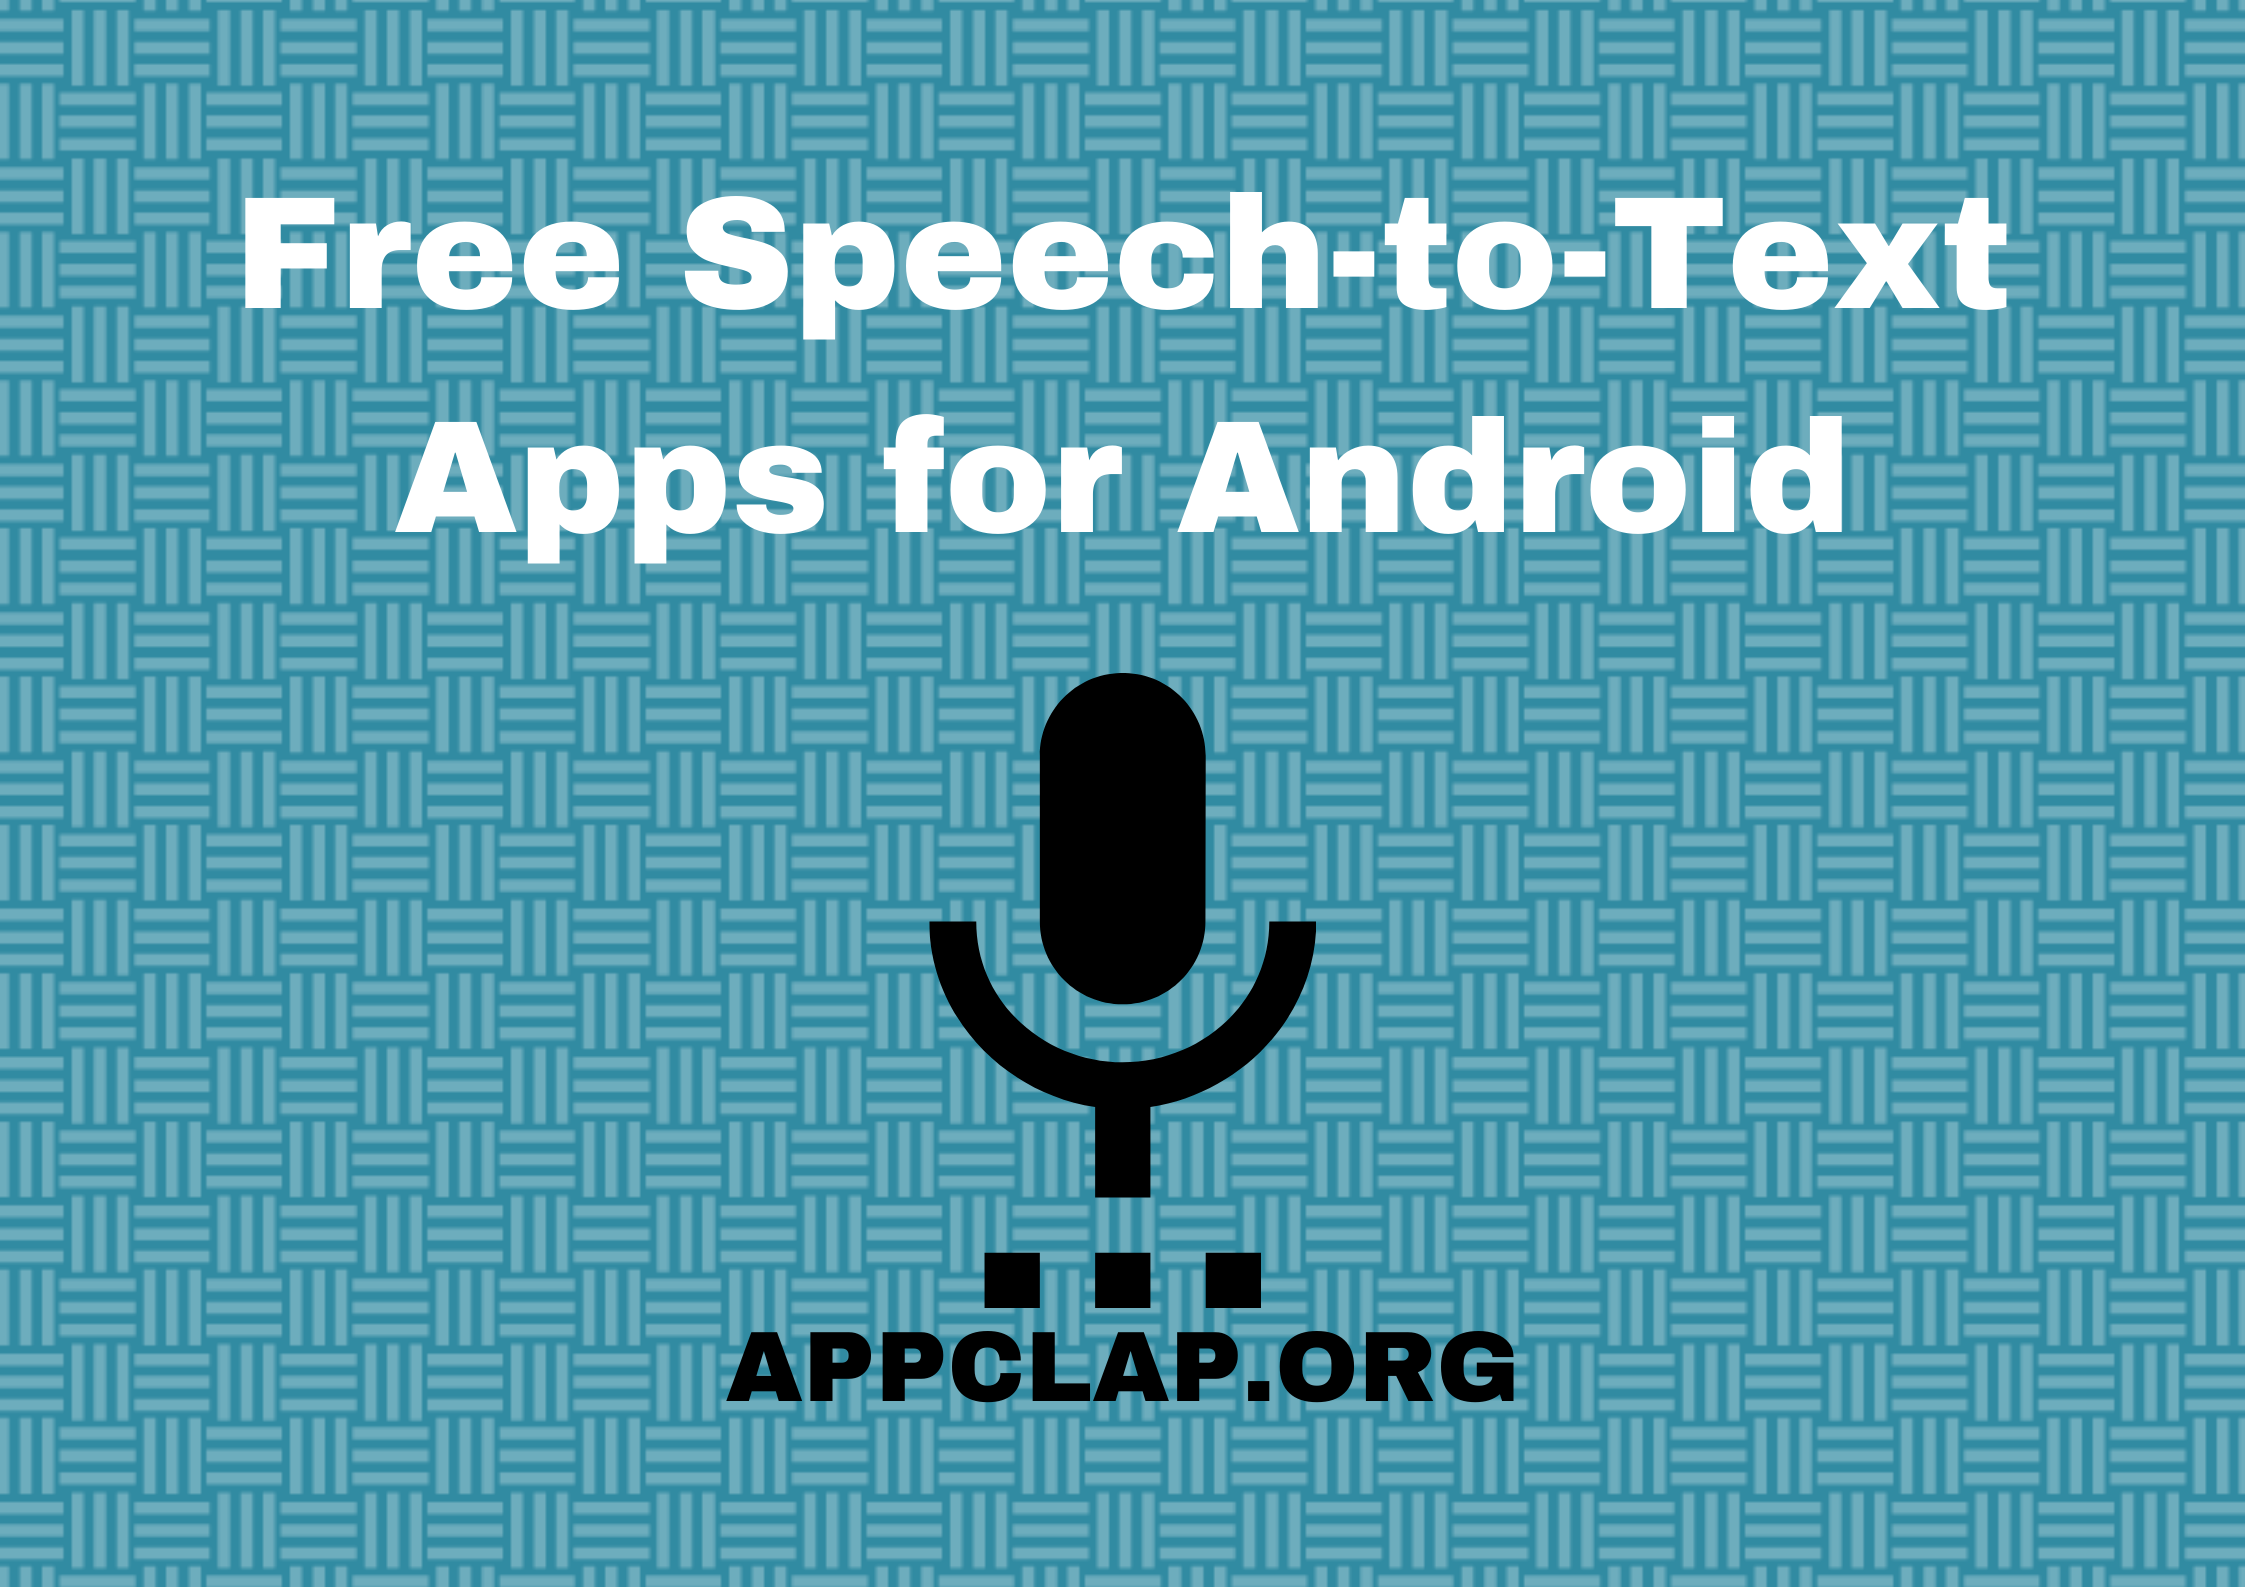 Free Speech-to-Text Apps for Android